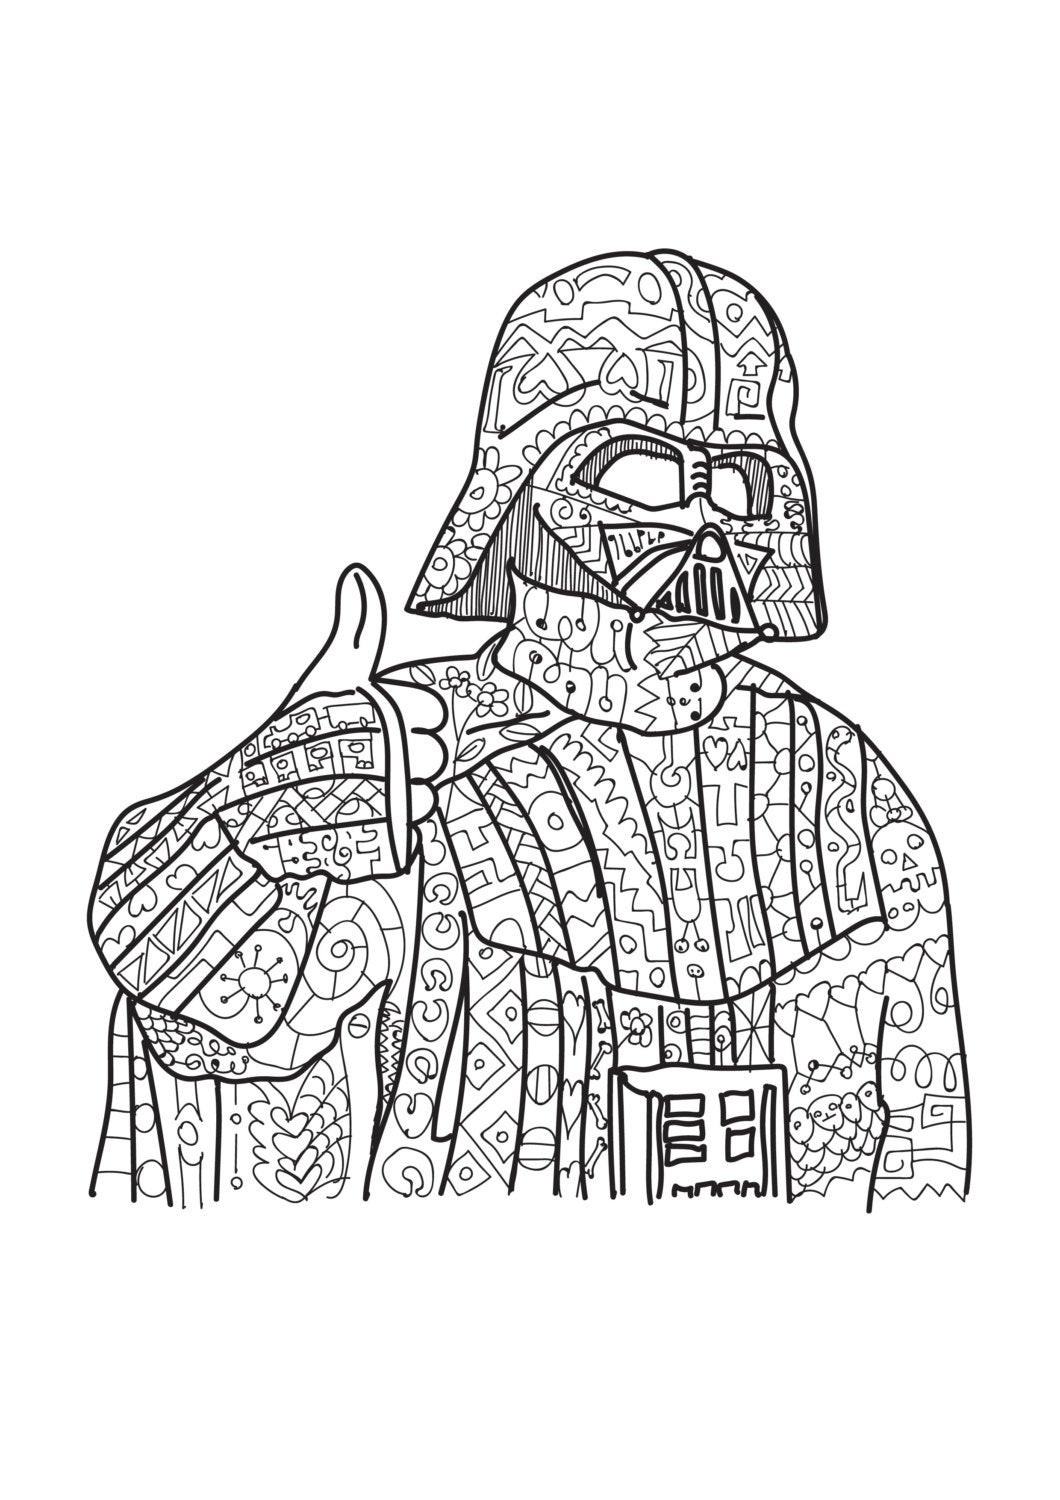 Star Wars Free Printable Coloring Pages
 Darth Vader Star Wars coloring page Adult coloring